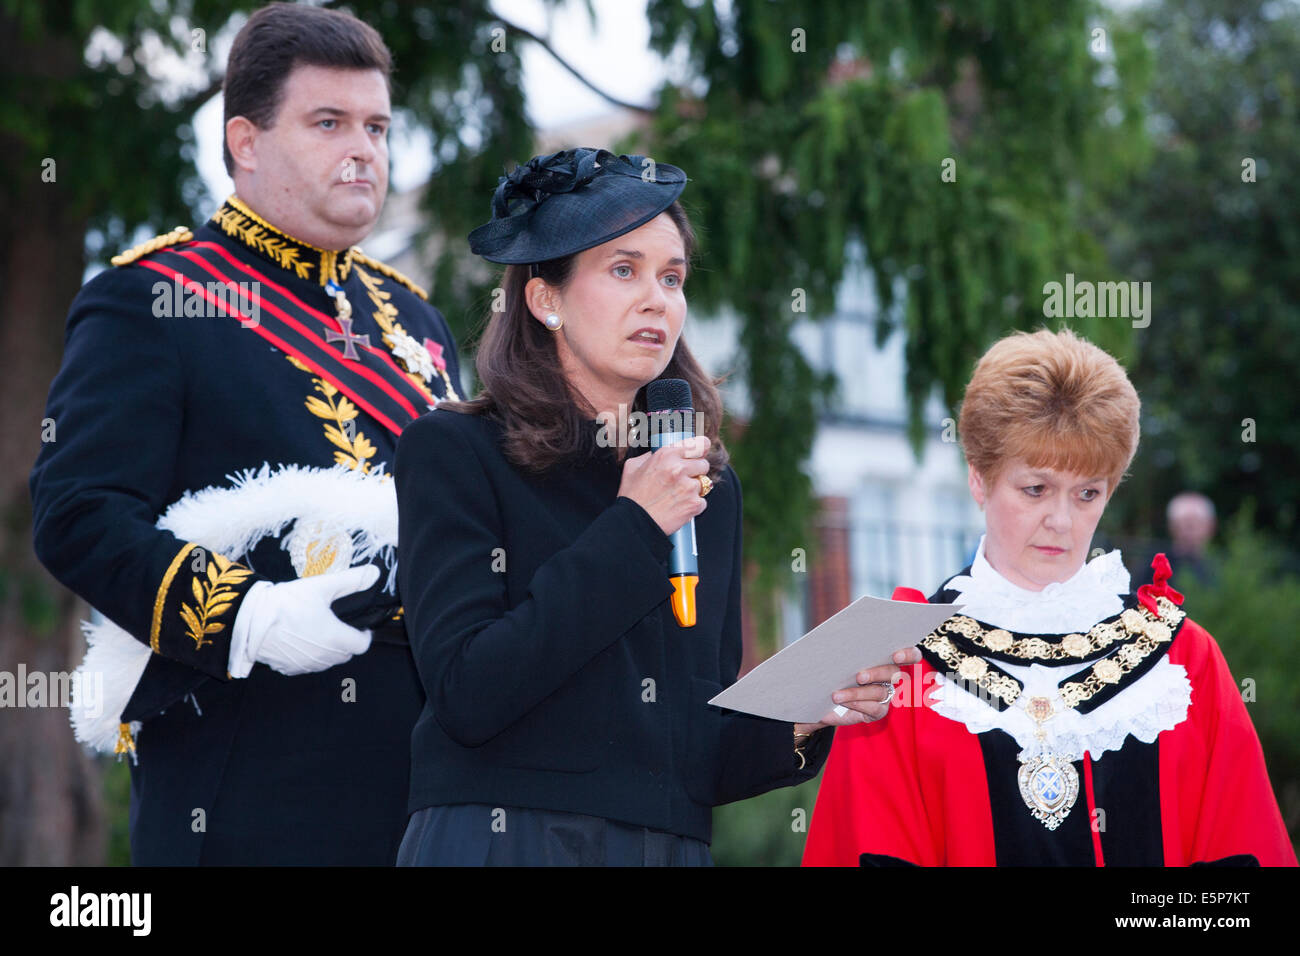 Twickenham, London, UK. 4th Aug, 2014. Centre - speaking into the microphone - Her Serene Highness Princess Marie-Therese von Hohenberg (great-granddaughter of Archduke Franz Ferdinand of Austria–Hungary - whose assassination in June 1914 lead directly to World War 1 - The Great War of 1914/1918) at a service to mark the 100th anniversary of Great Britain's entry into the The First World War. The service was held at Radnor Gardens; Twickenham; London UK on Monday August 4; 2014. Left is her husband; Mr. Credit:  David Gee/Alamy Live News Stock Photo